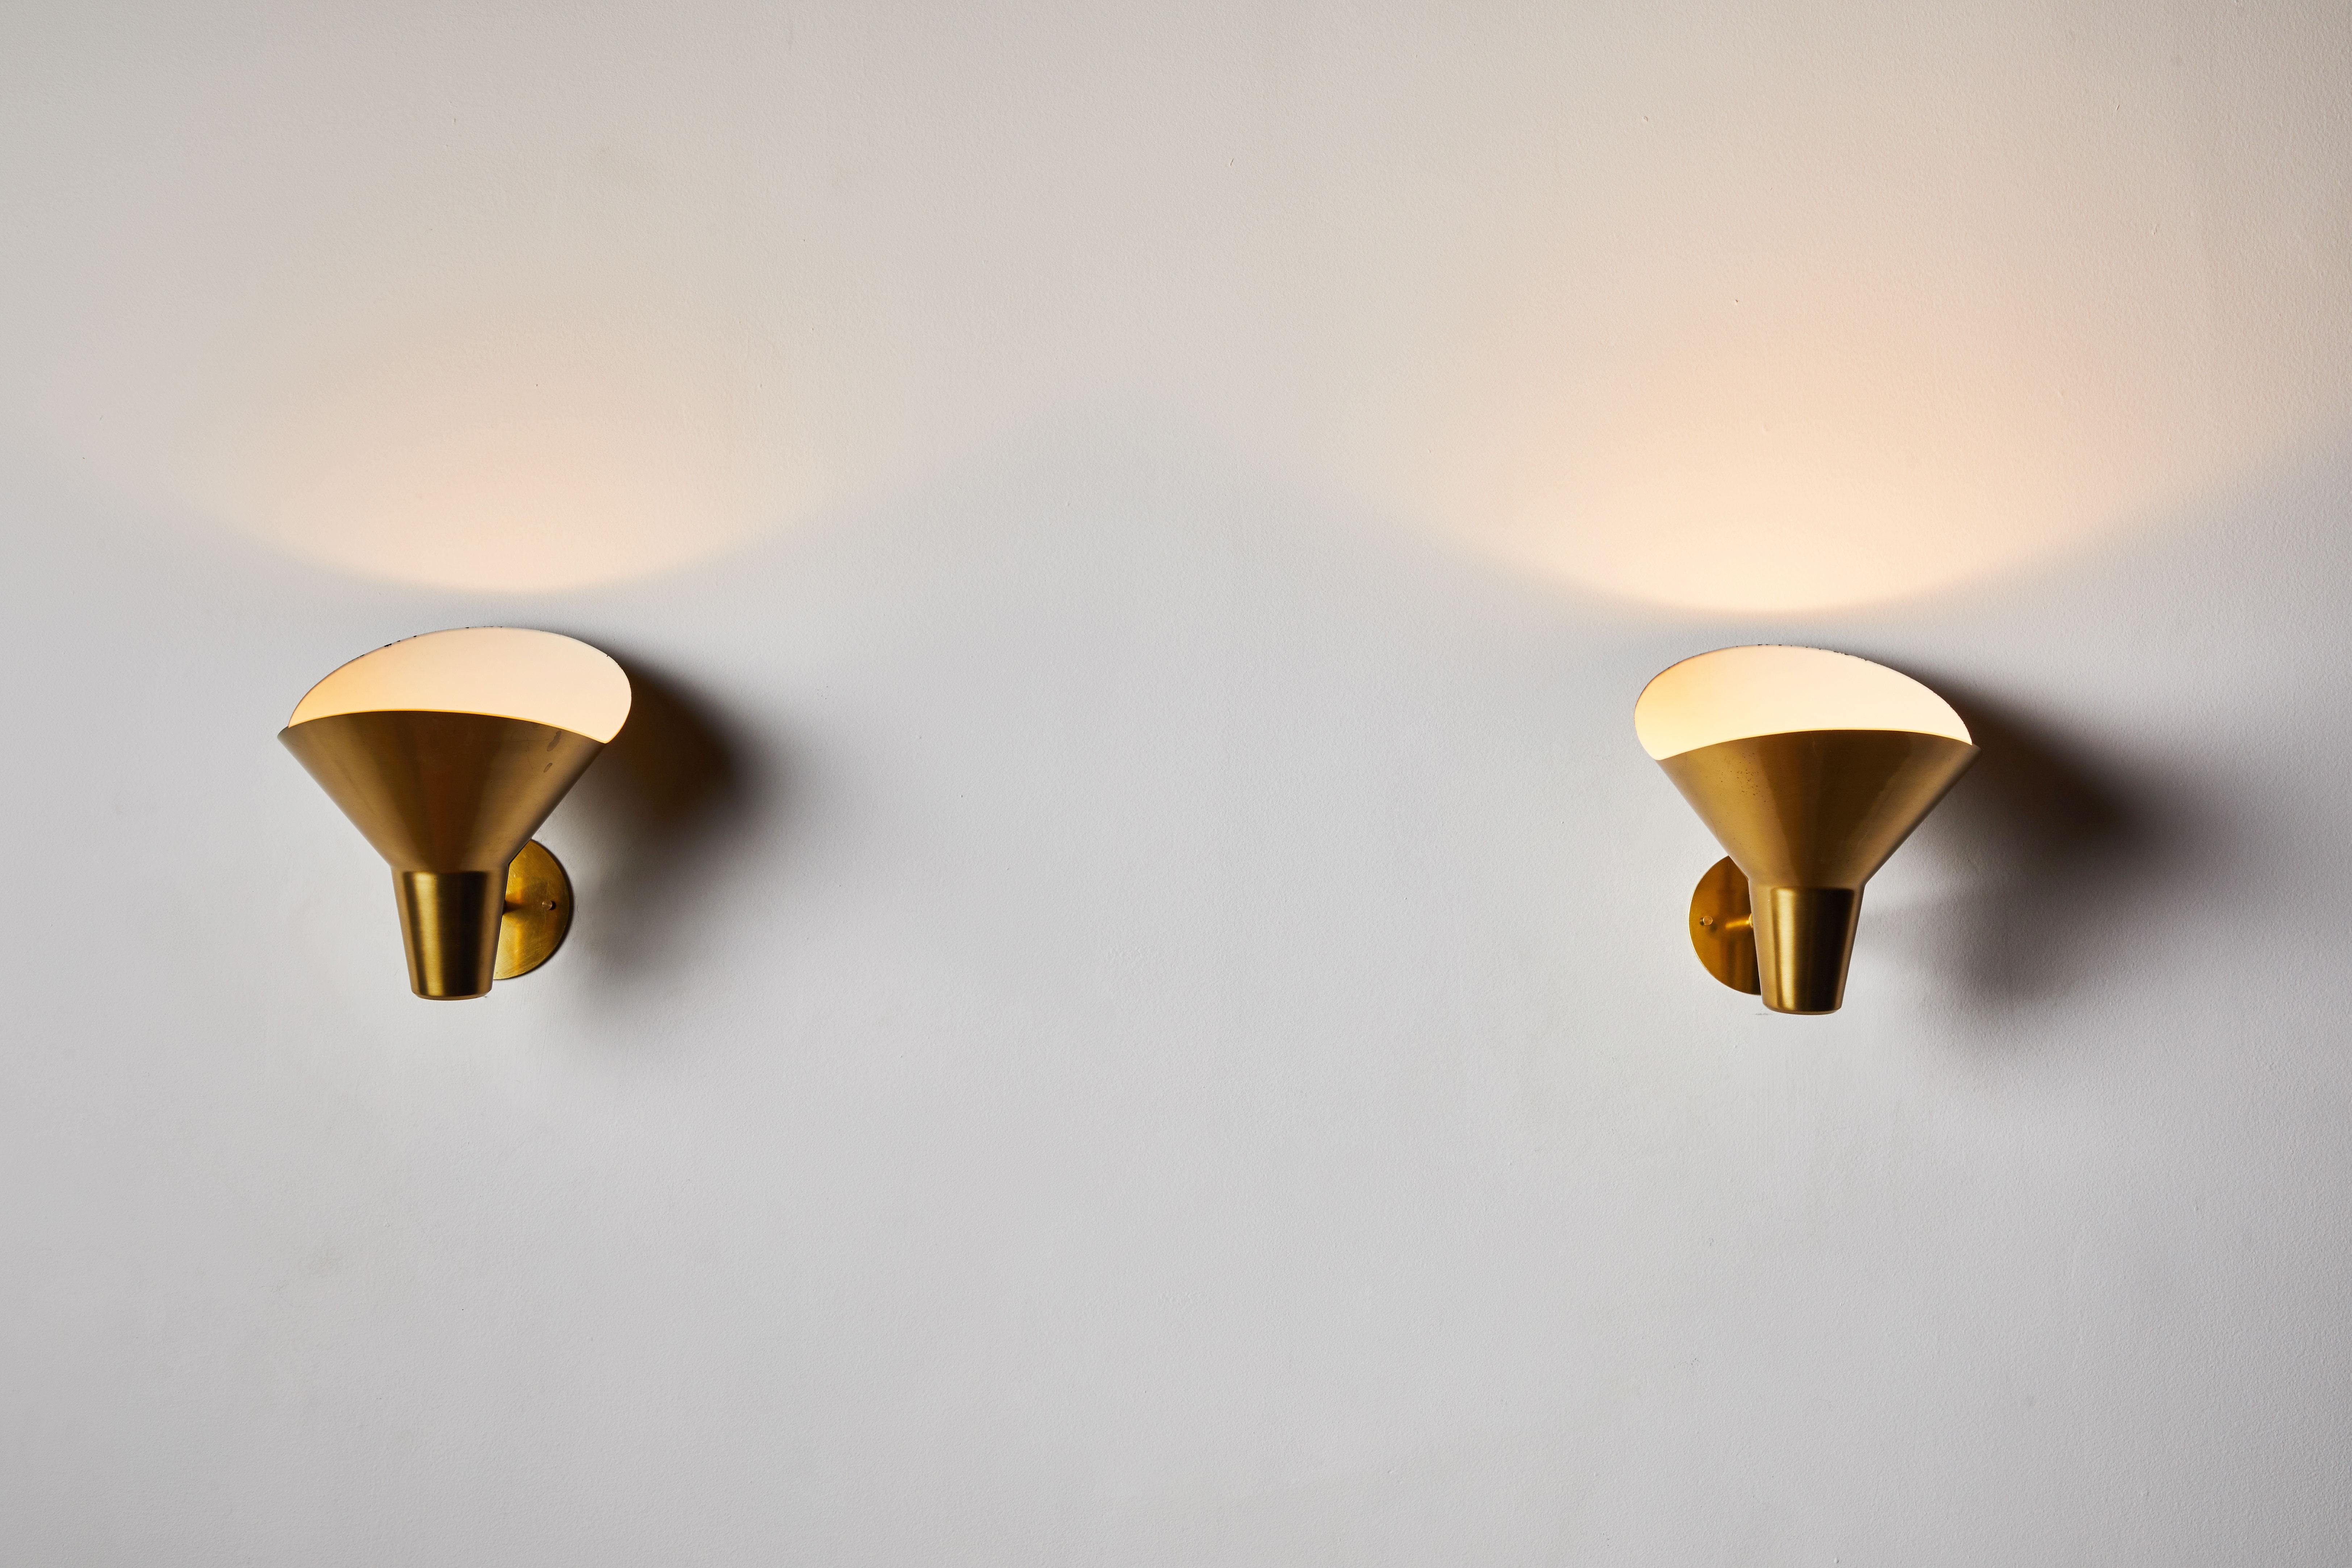 Pair of brass sconces by Hans Bergström for Ateljé Lyktan. Designed and manufactured in Sweden, circa the 1940s. Wired for US junction boxes. Each sconce takes one E27 60w maximum bulb.